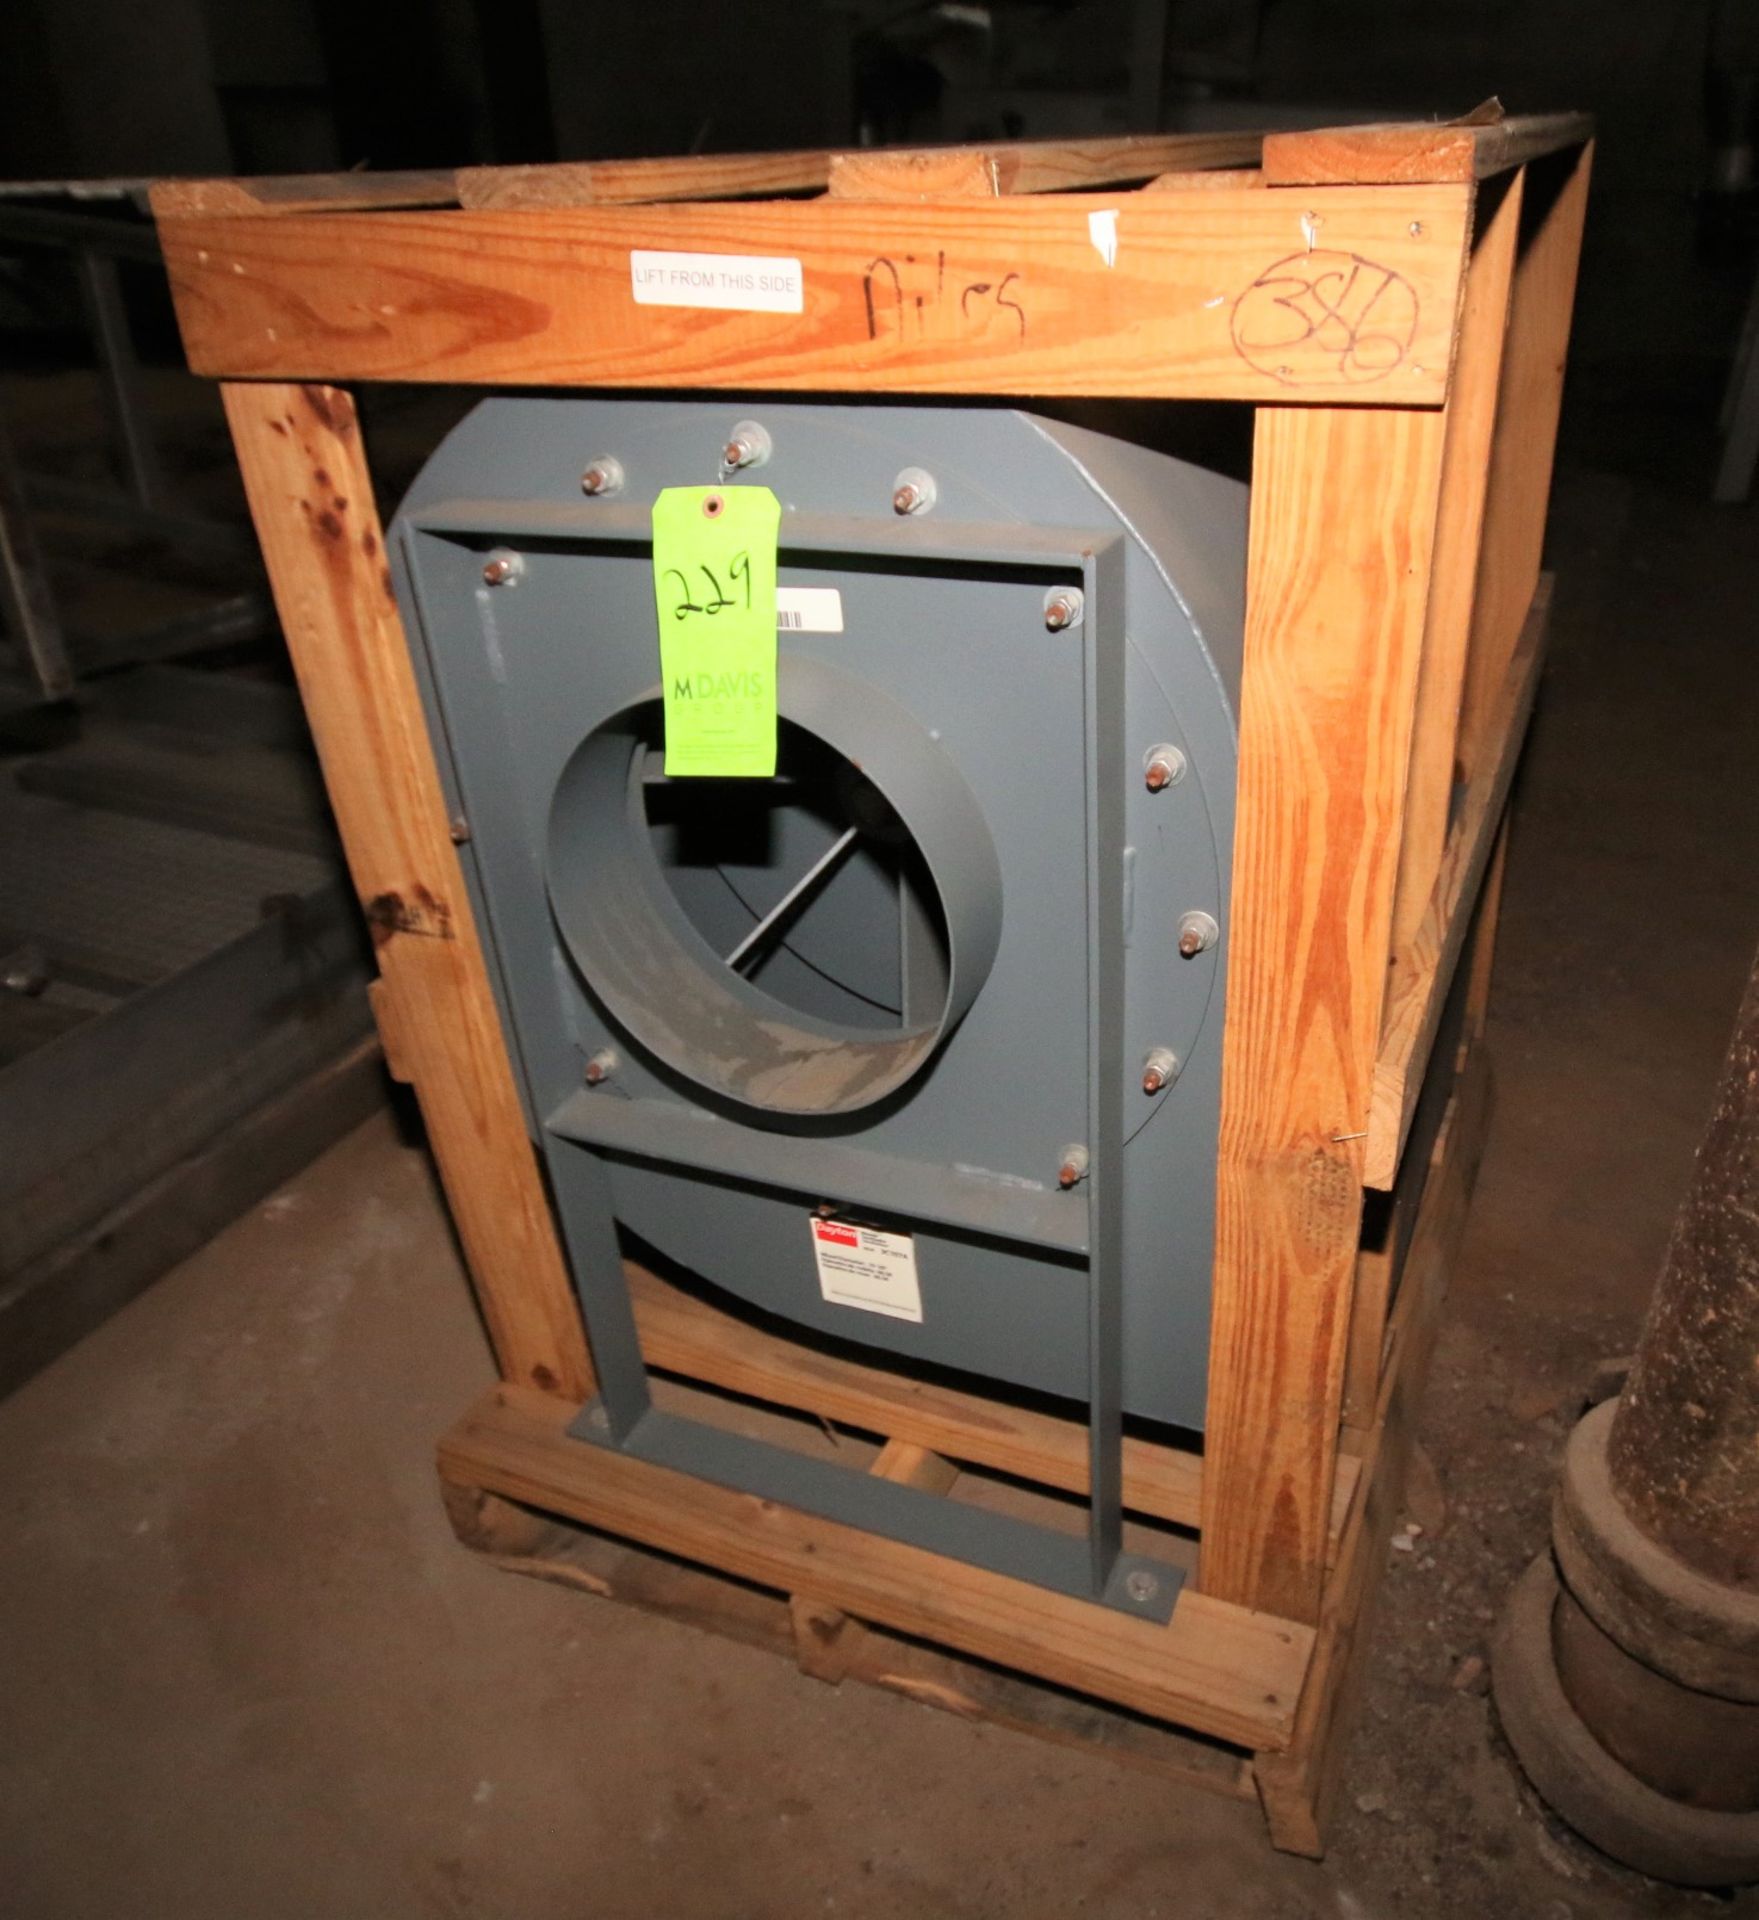 New in Crate Dayton 19" Blower, Model 3C107A